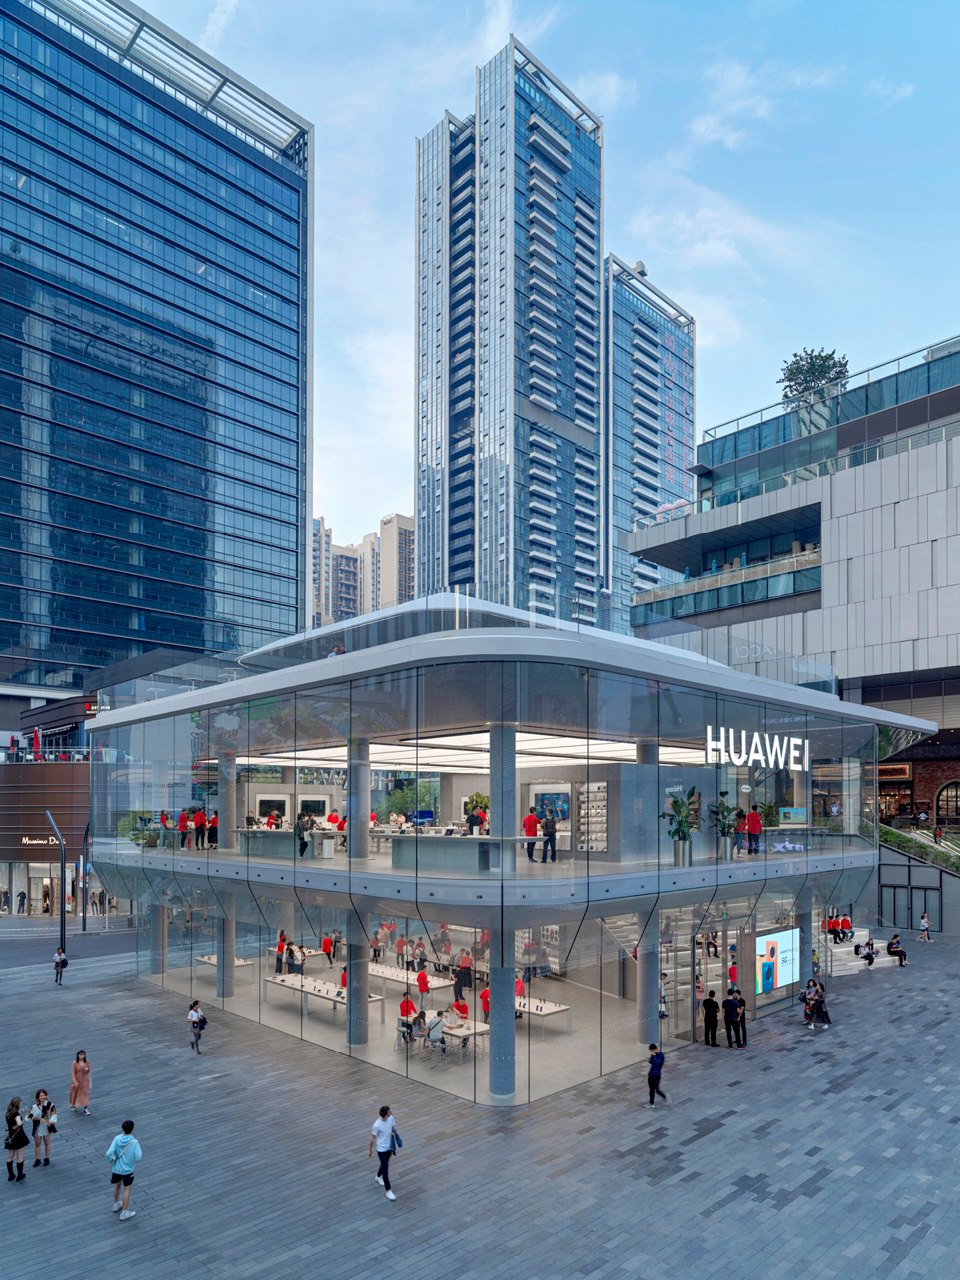 Huawei's global flagship store by Saguez & Partners